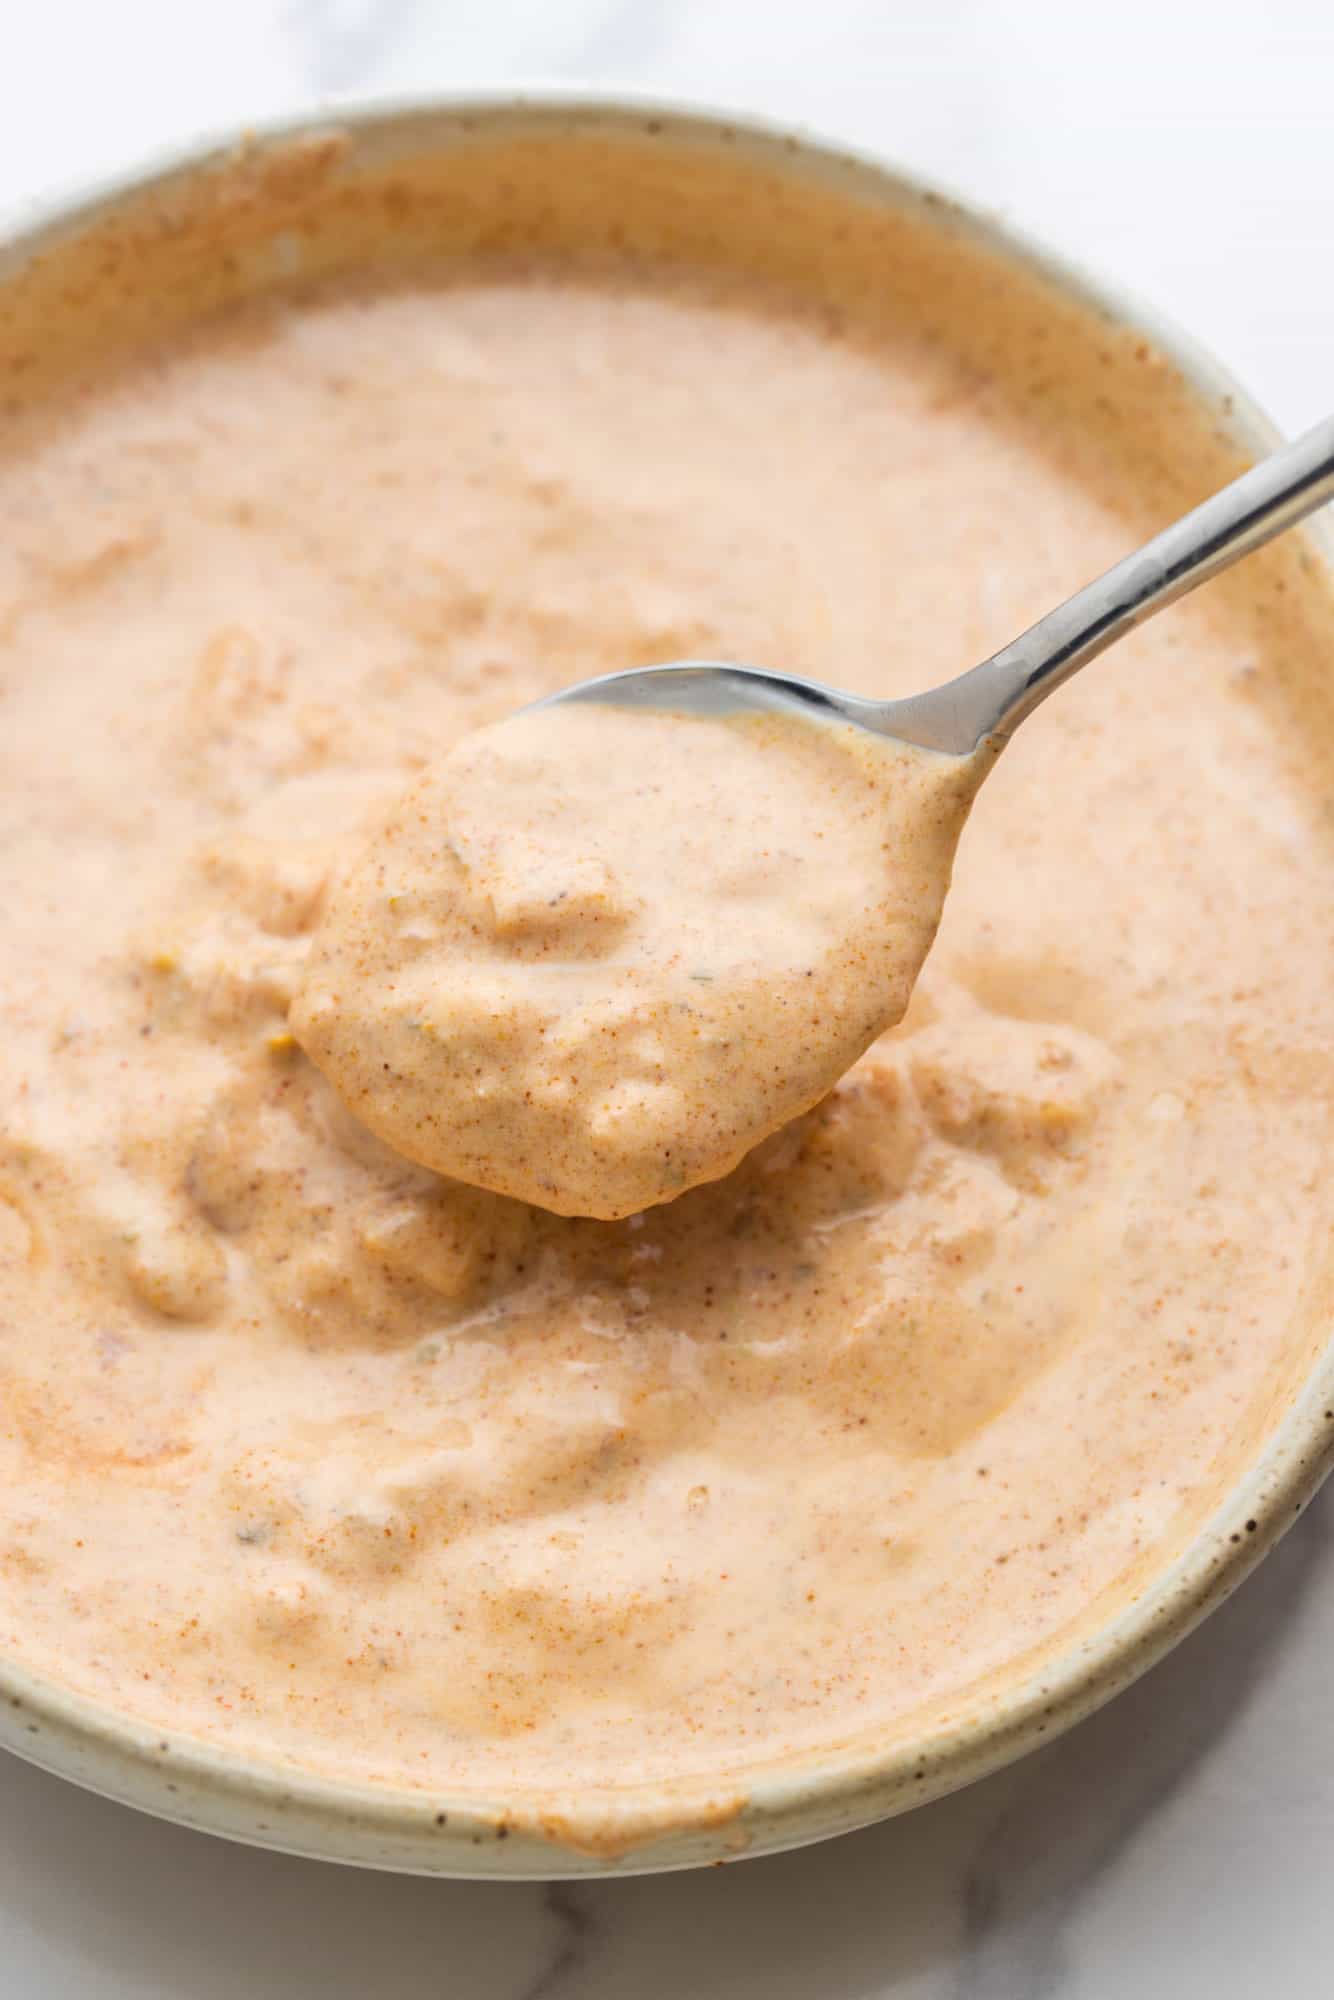 A salsa and sour cream sauce to add to chicken wraps.